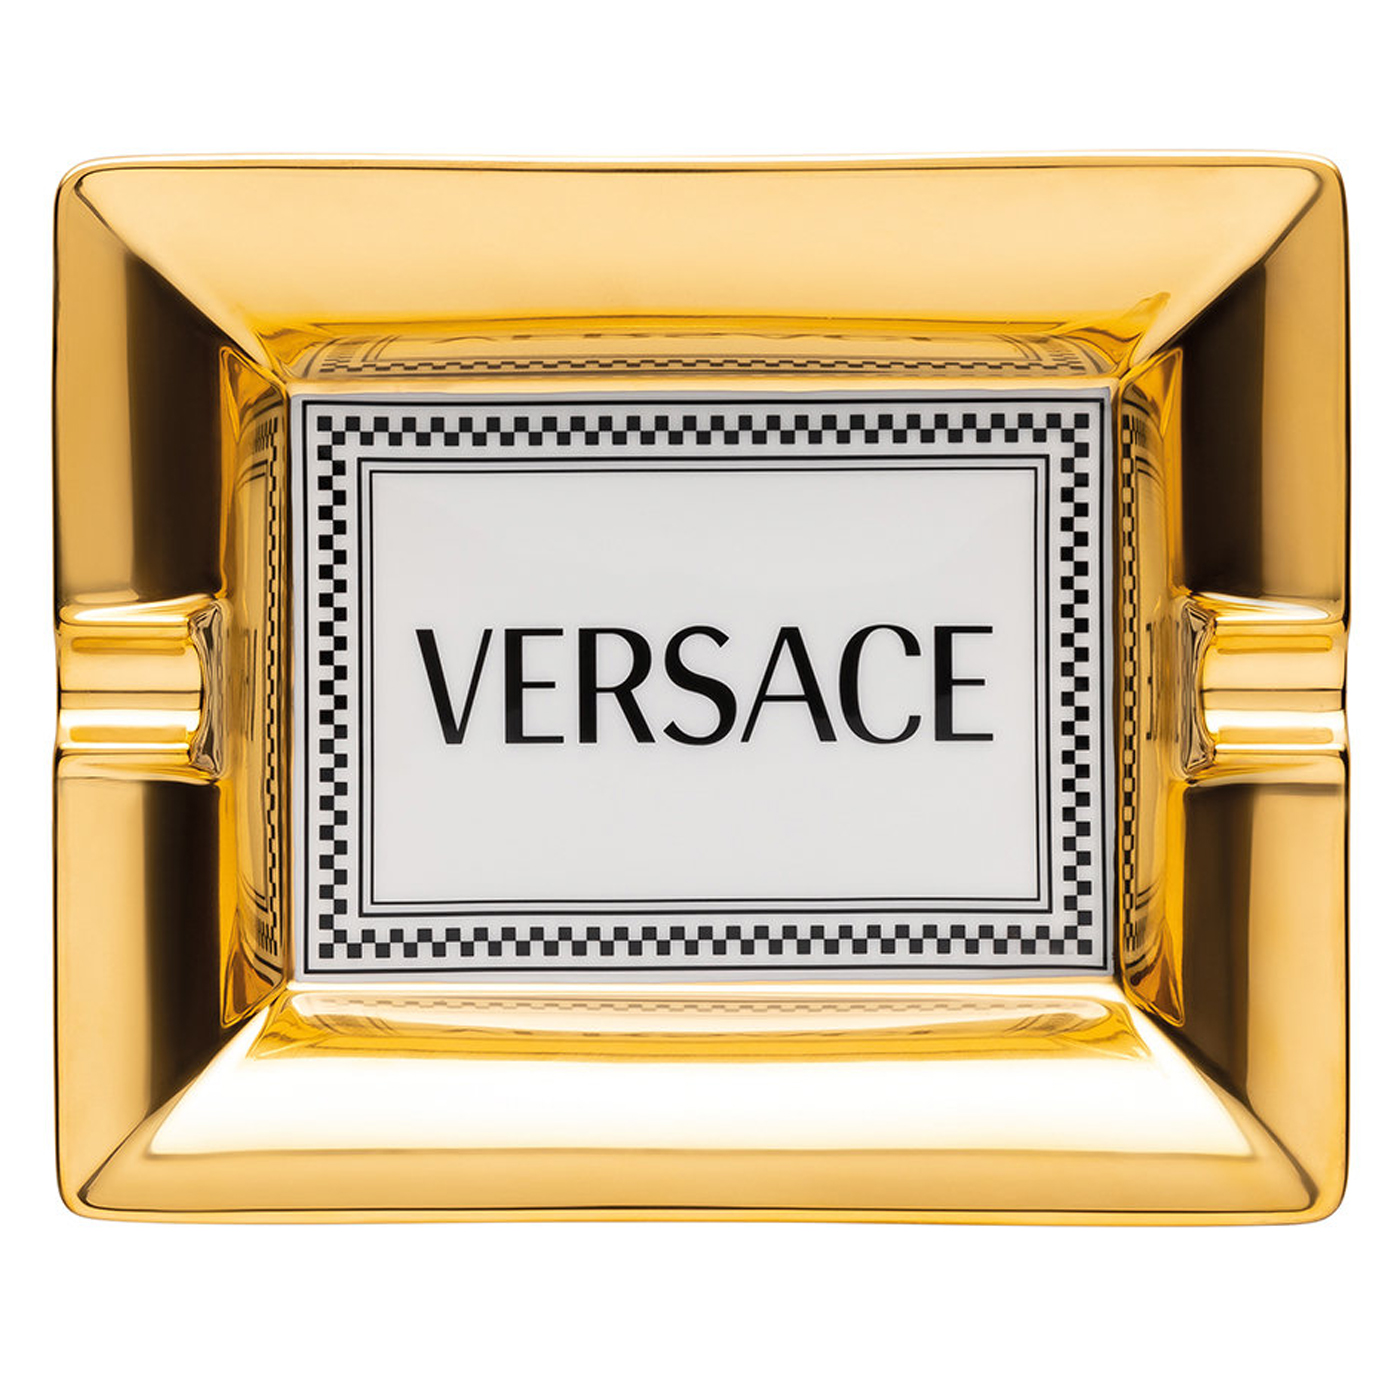 versace wrapping paper